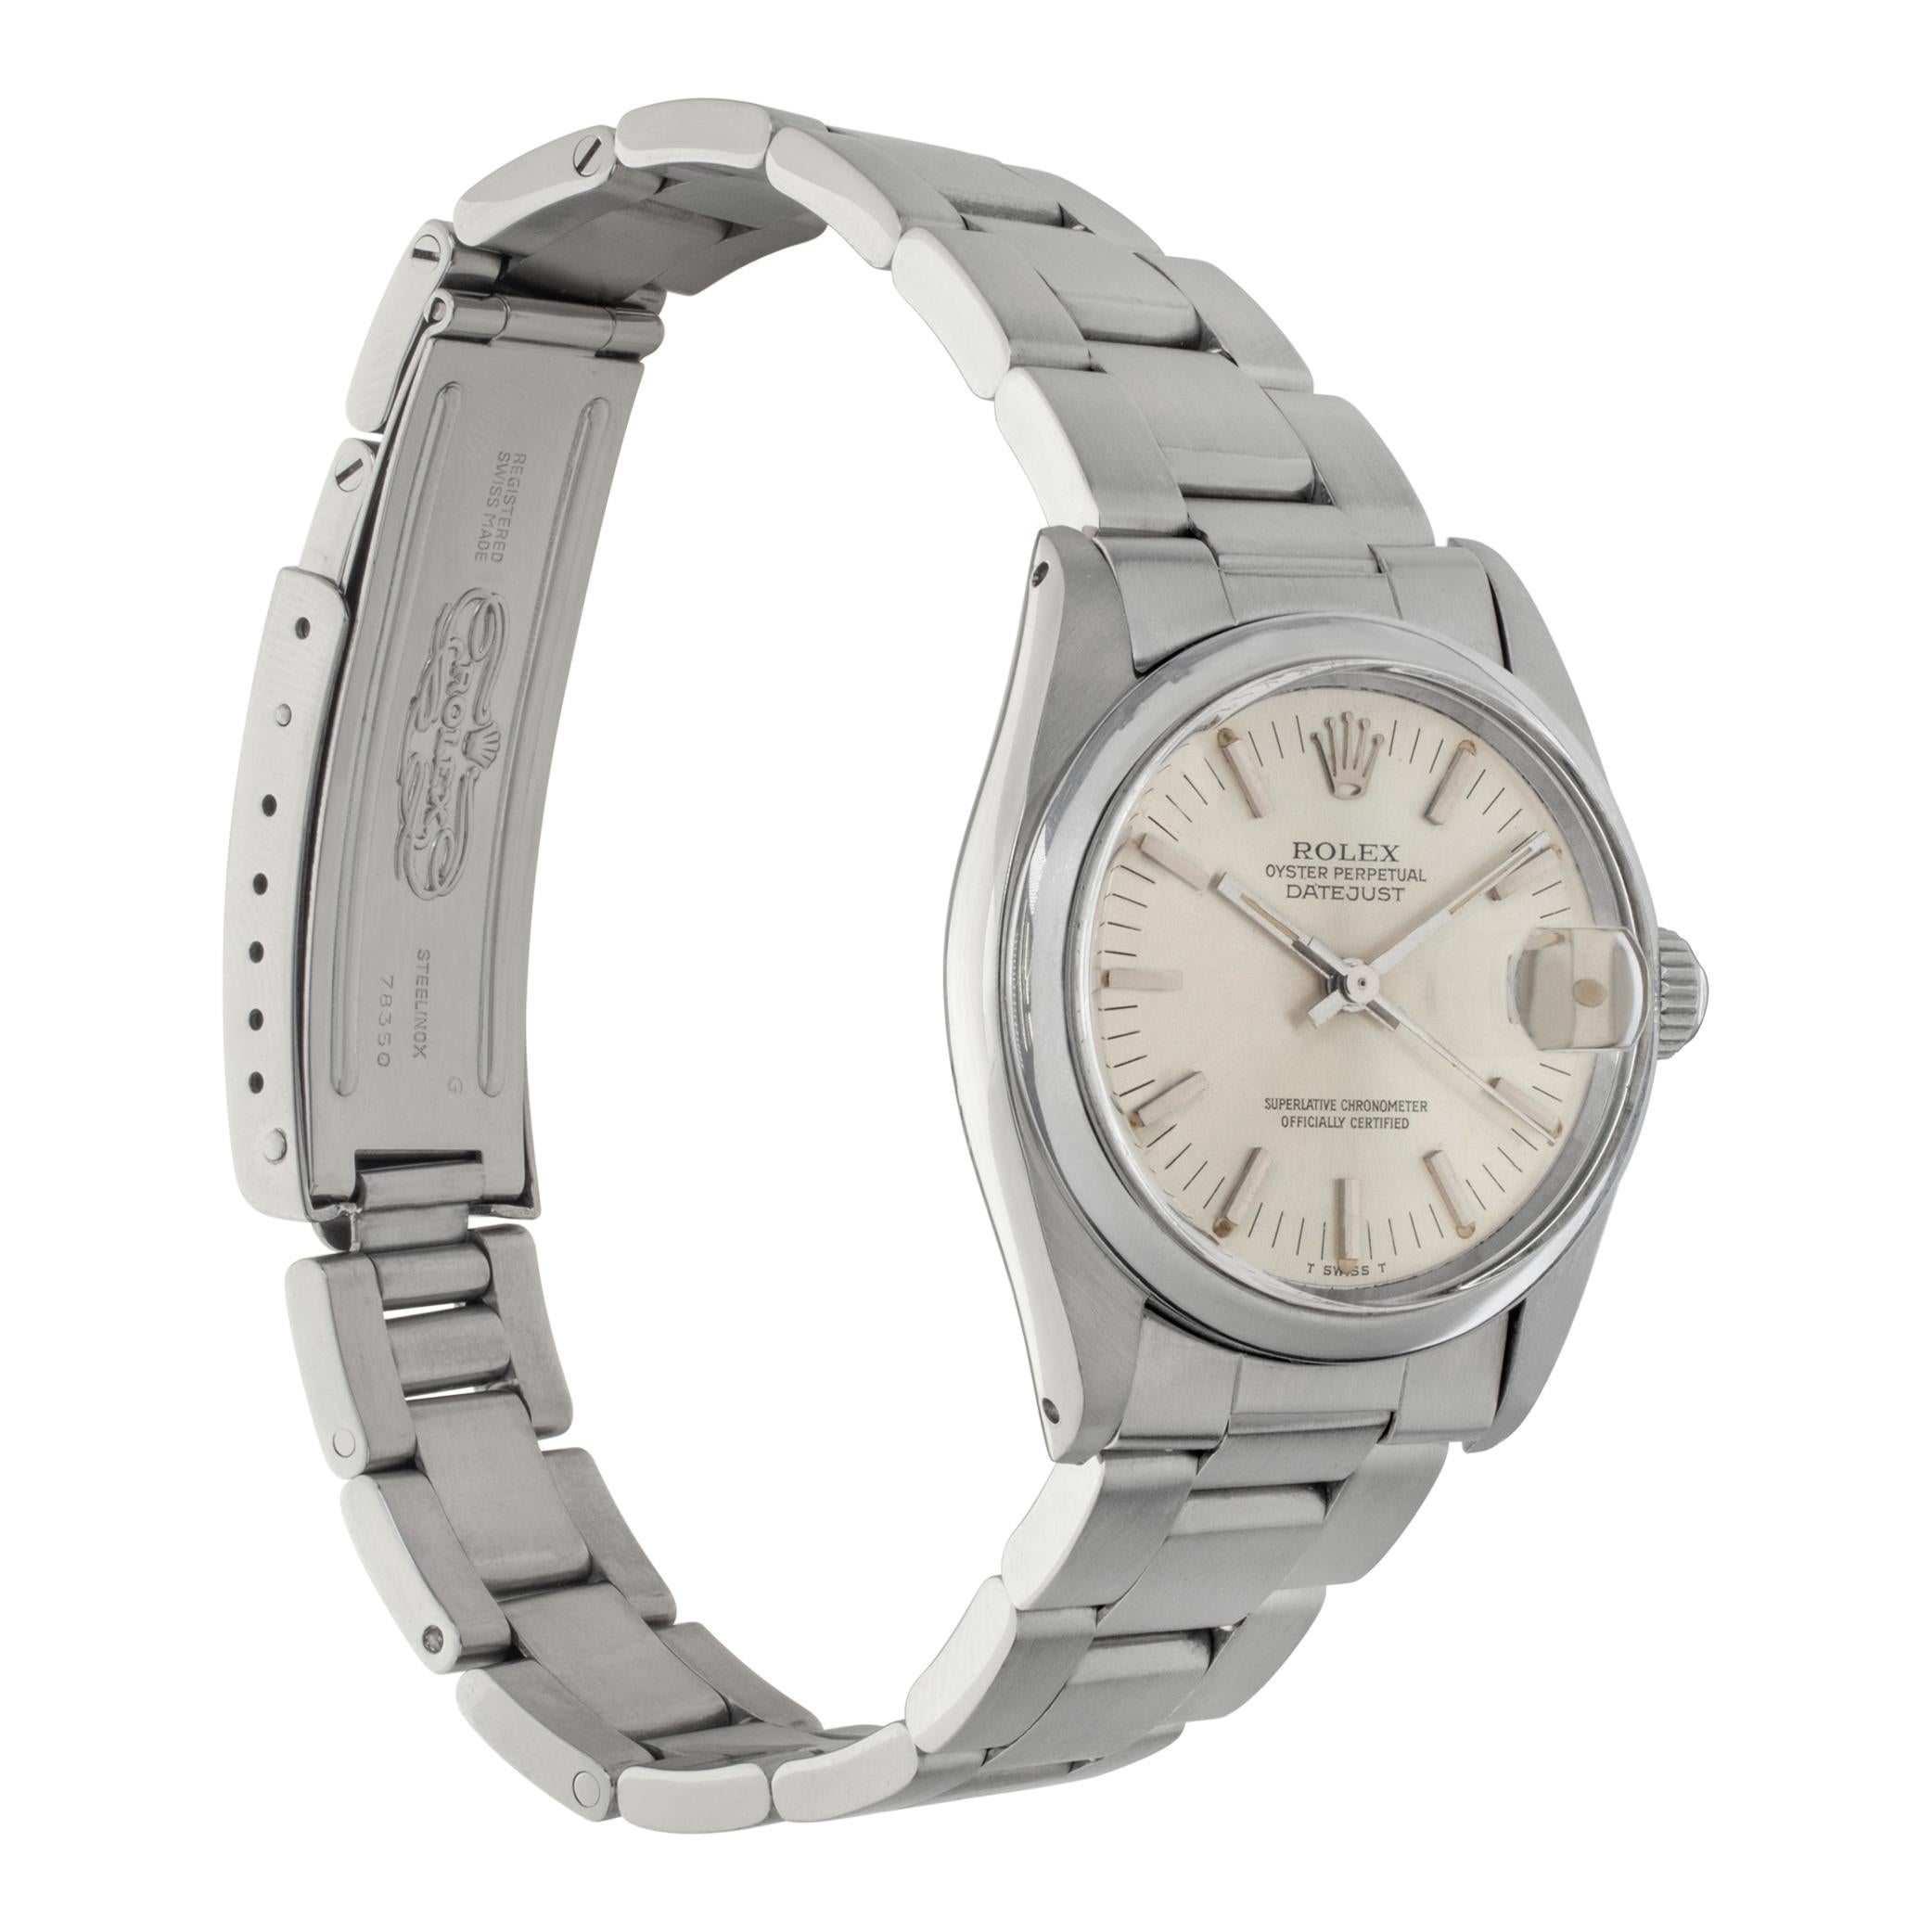 Rolex Datejust stainless steel Automatic Wristwatch Ref 68240 In Excellent Condition For Sale In Surfside, FL